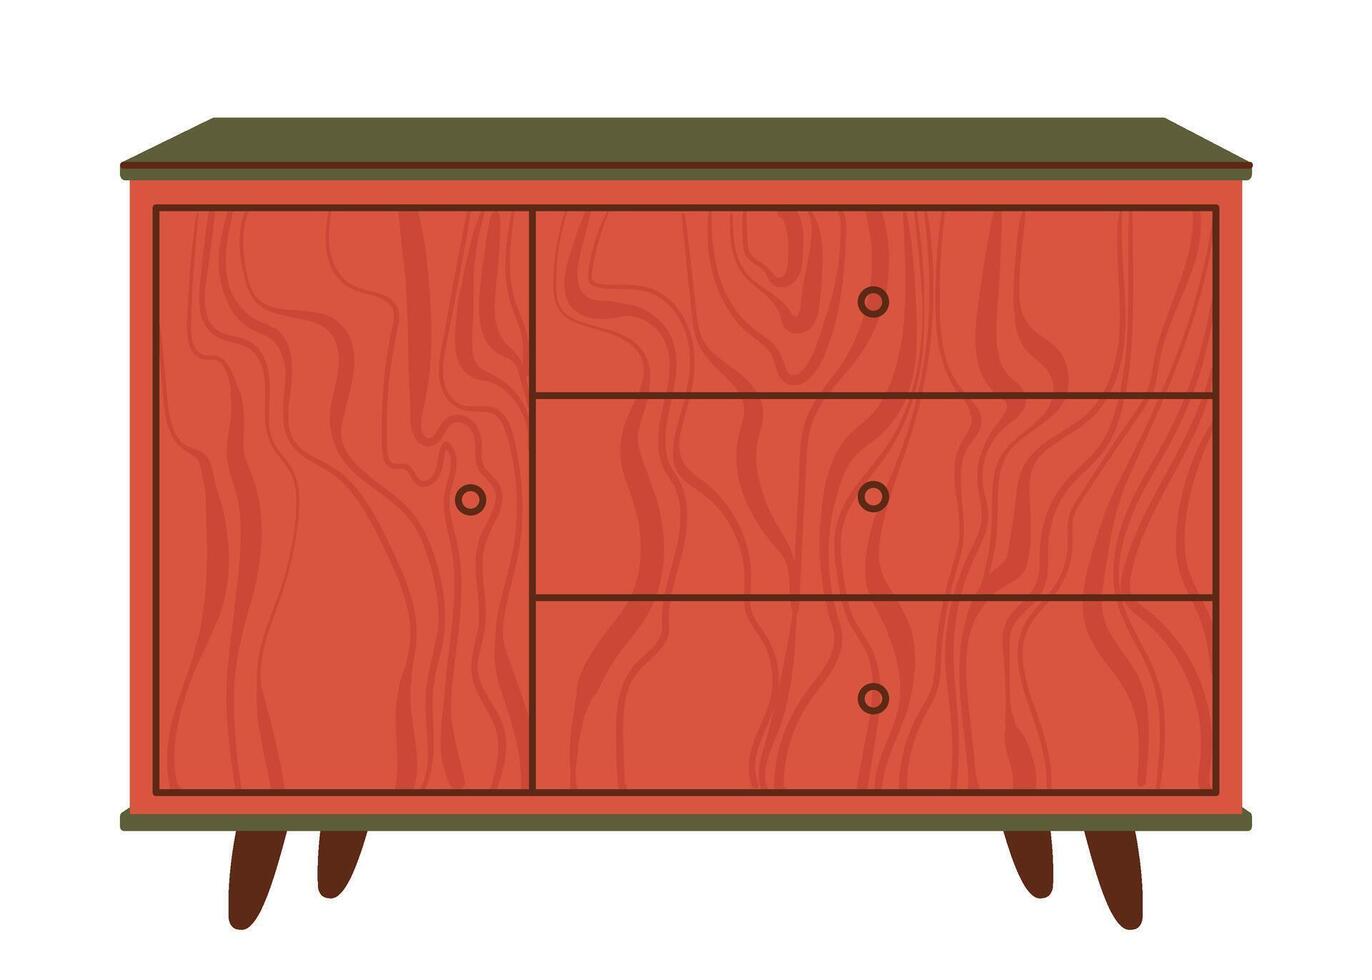 Chest of drawers. Red wooden modern commode or dresser for home interior. Trendy storage furniture in scandinavian style for living room. Flat vector illustration isolated on a white background.